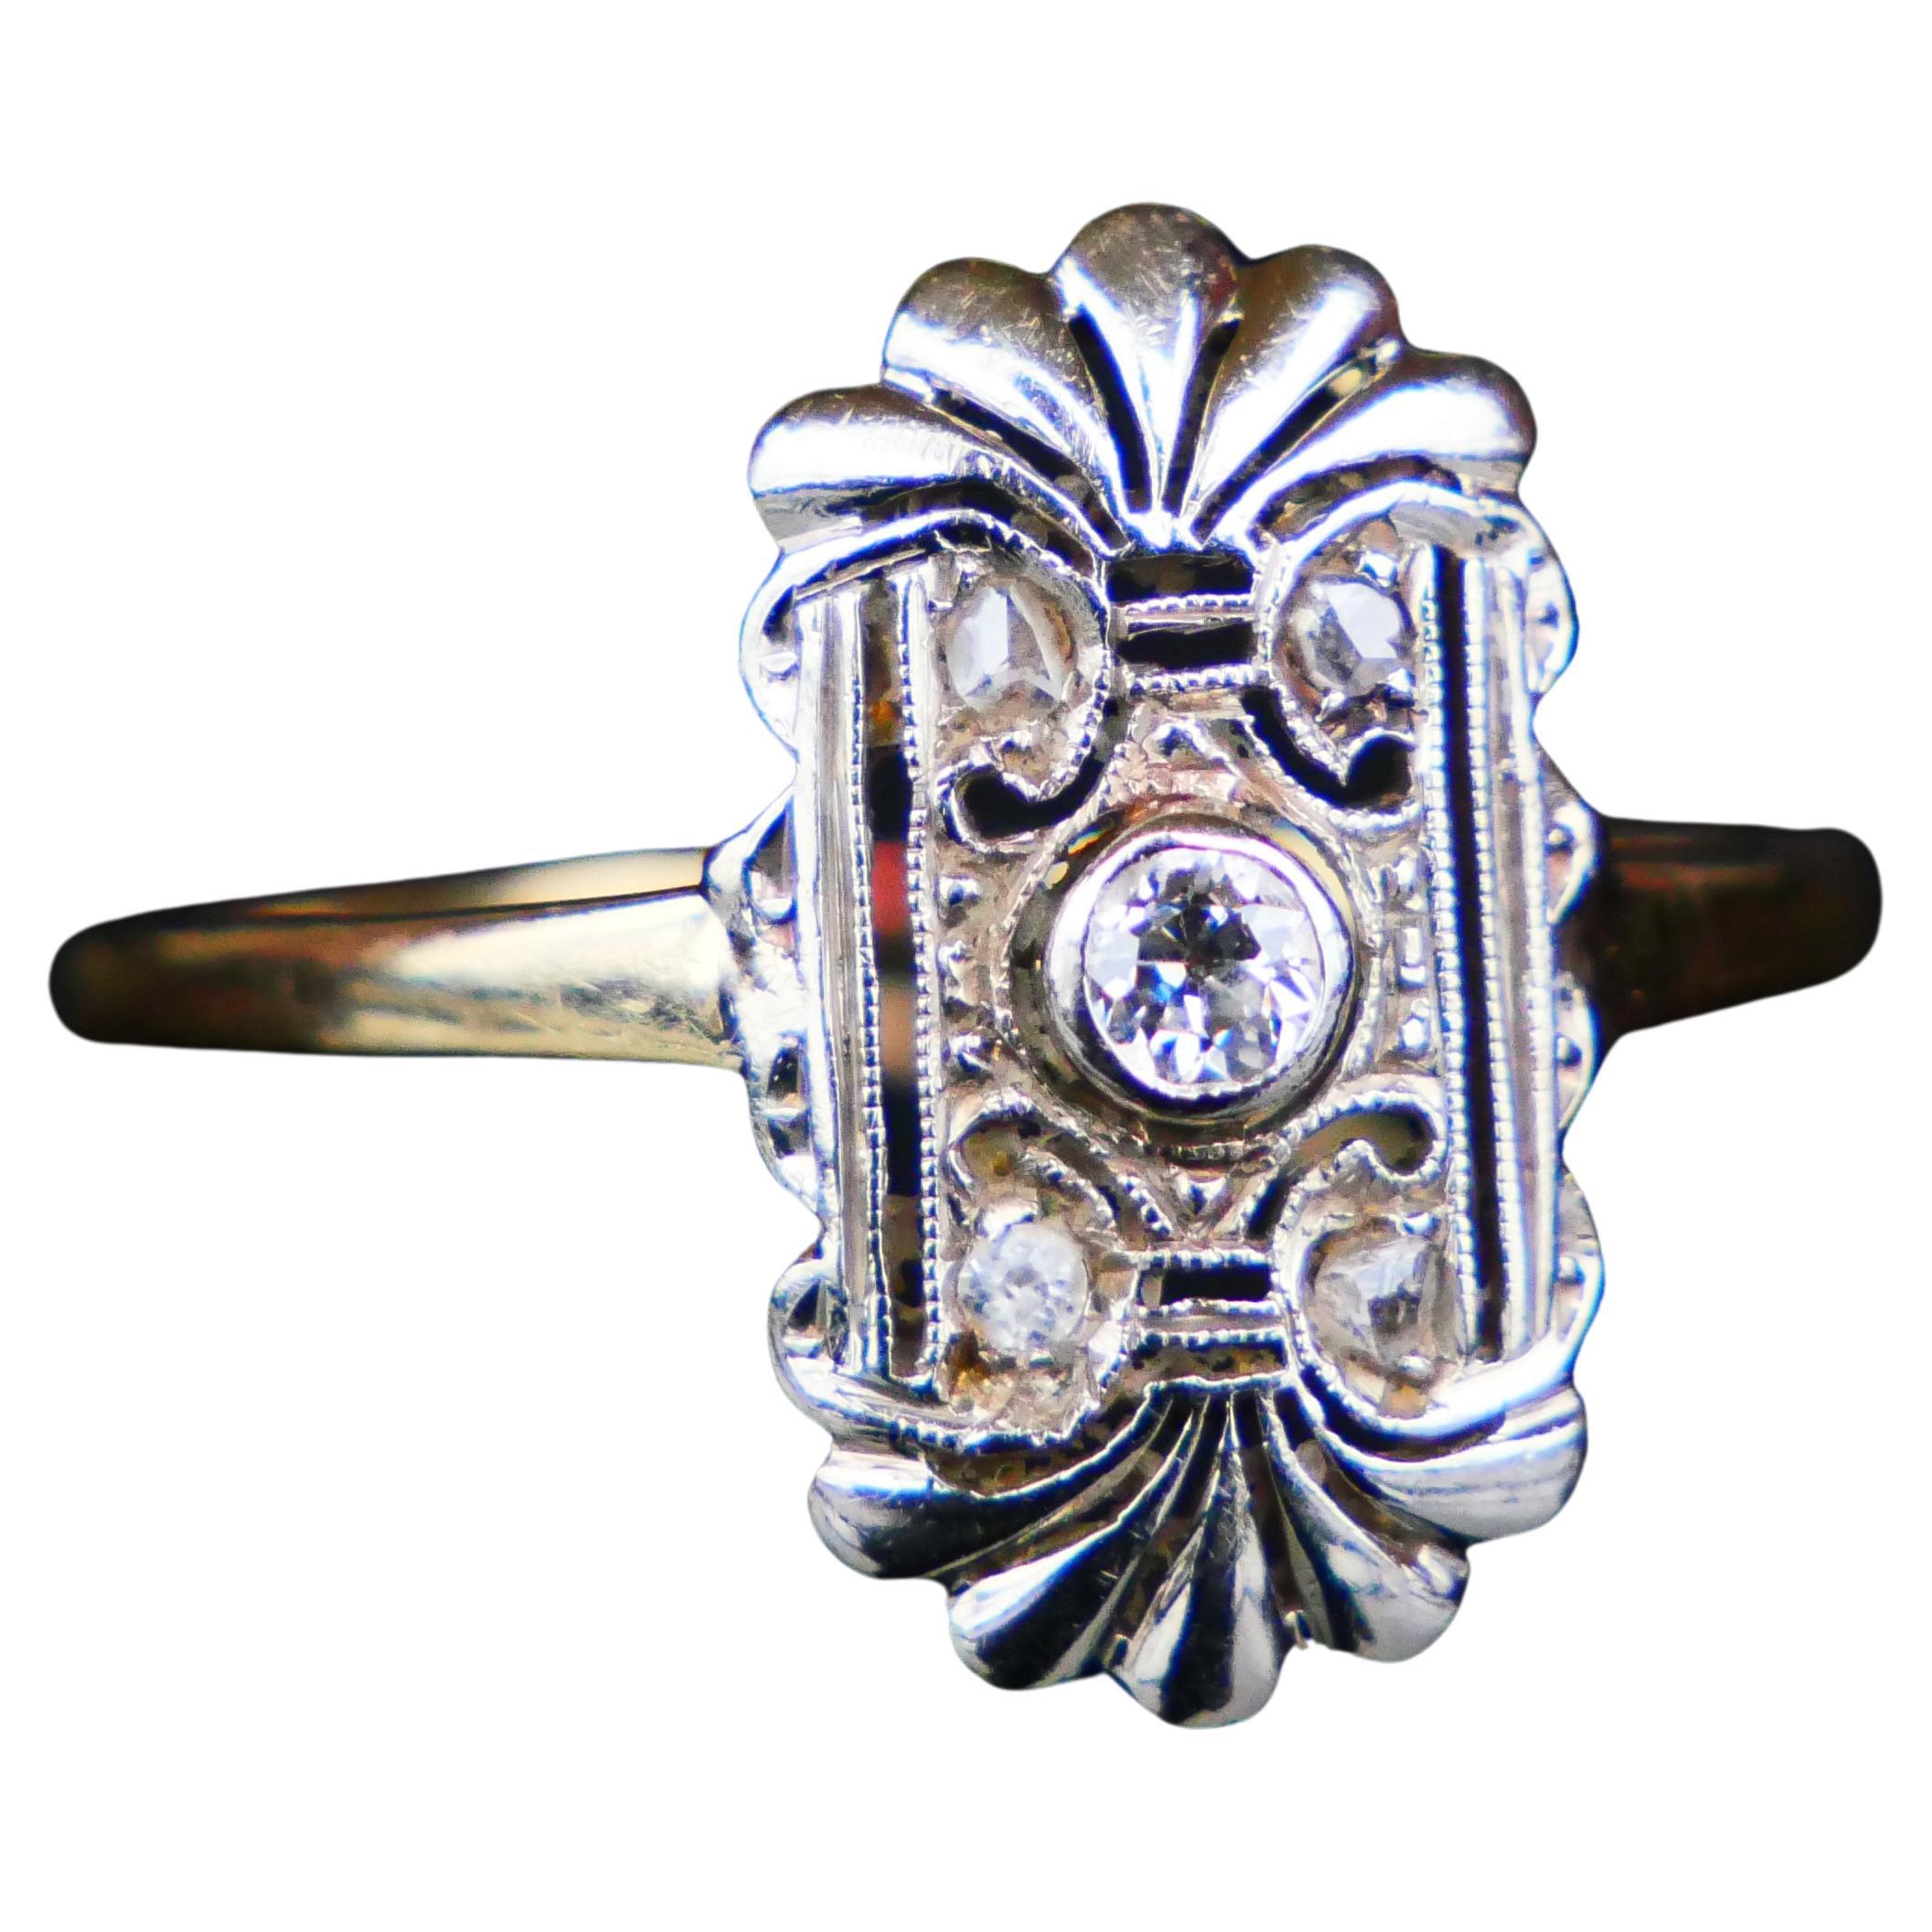 Ring from early 1920's -1930s hand - made in Wiena , Austria. Austrian period hallmarks on the band, metal parts tested solid 14K Yellow and White Gold.

Intricate 14K White Gold openwork crown : 16.5mm x 9.35 mm x 3.15mm deep with bezel set eight